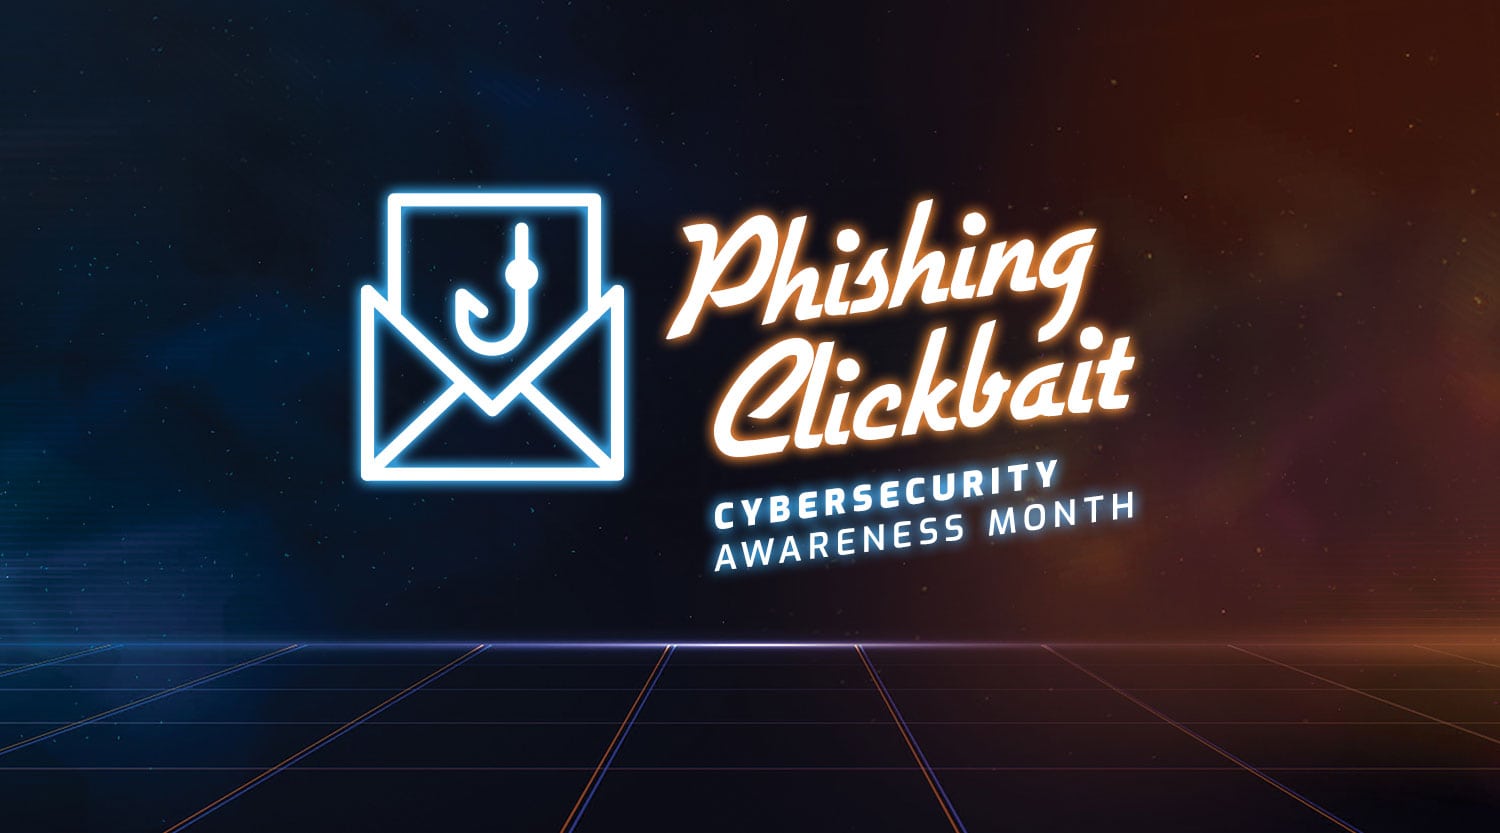 Phishing clickbait with an envelope and hook icon